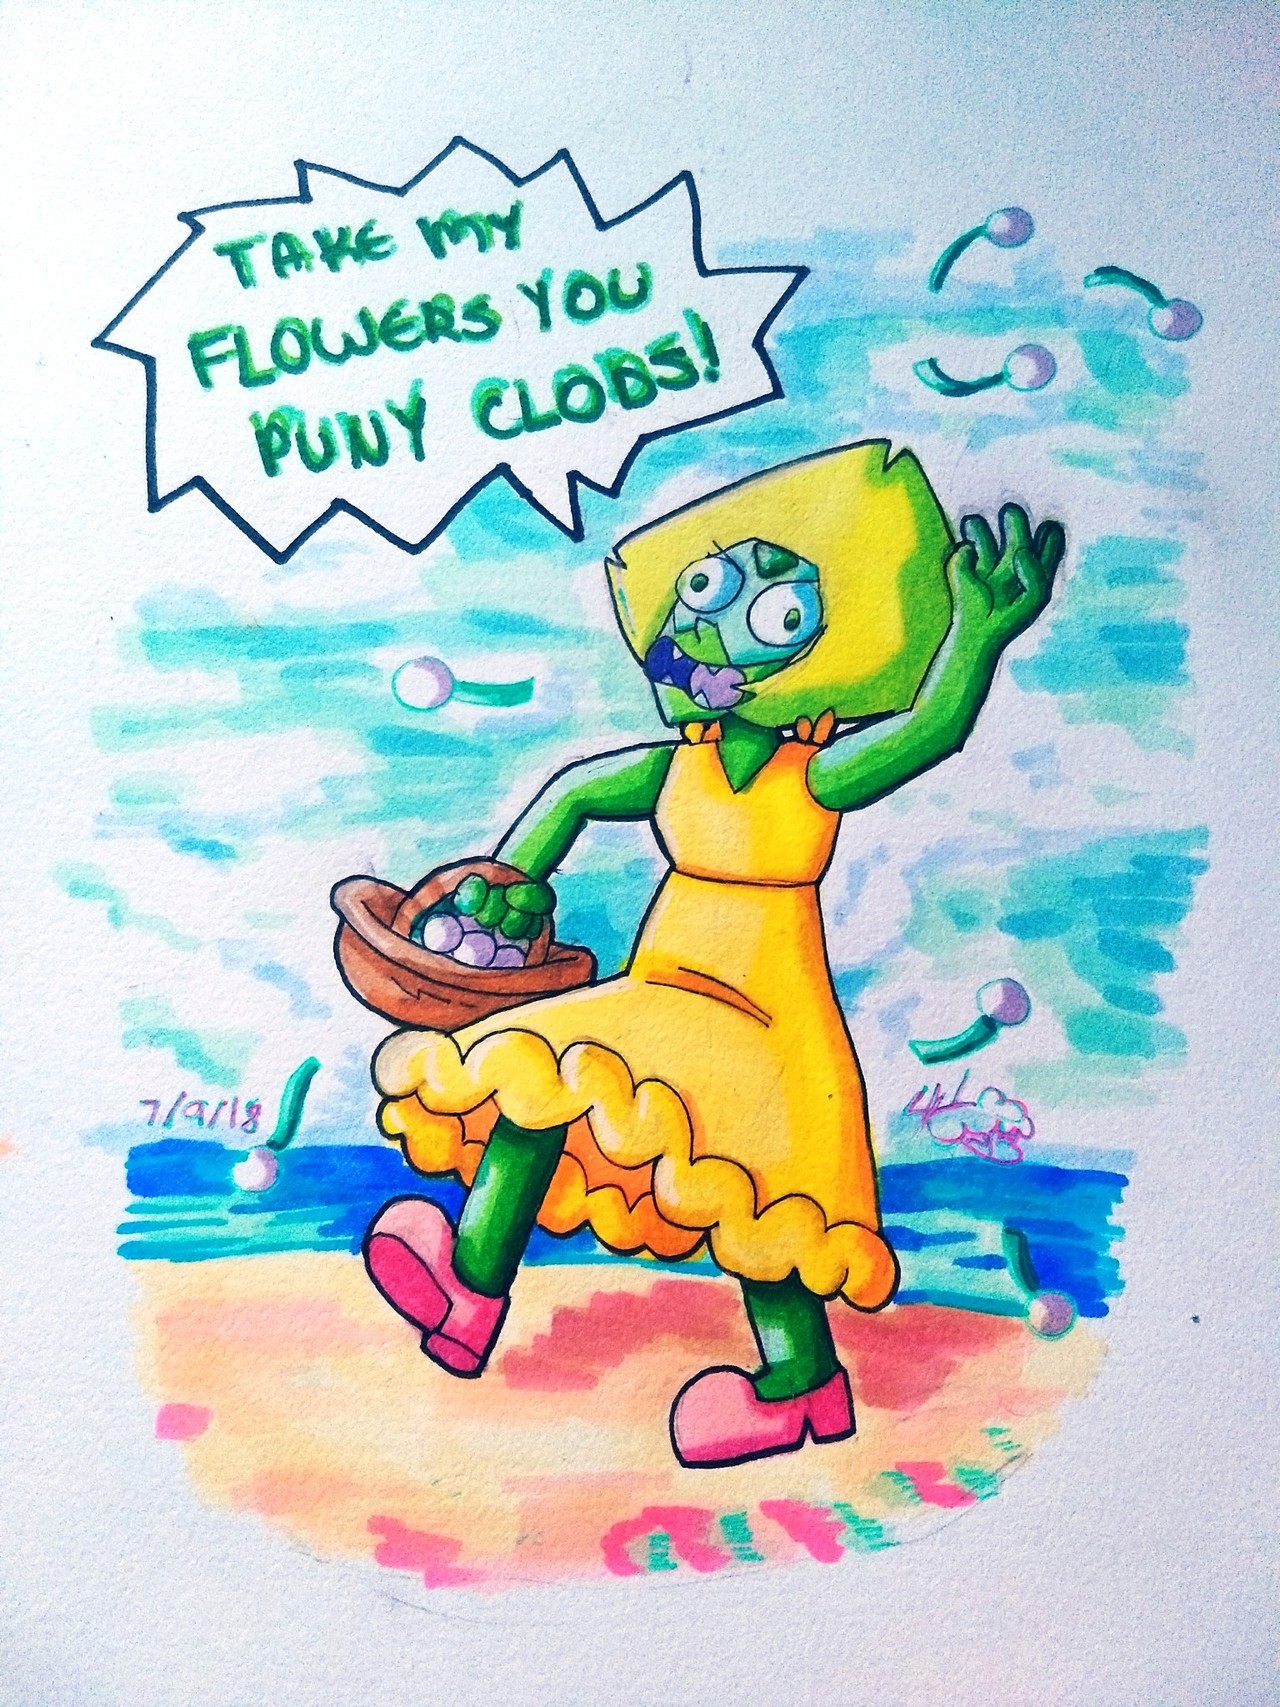 I absolutely loved Peridots bit as being the flower girl in reunited…. Just priceless